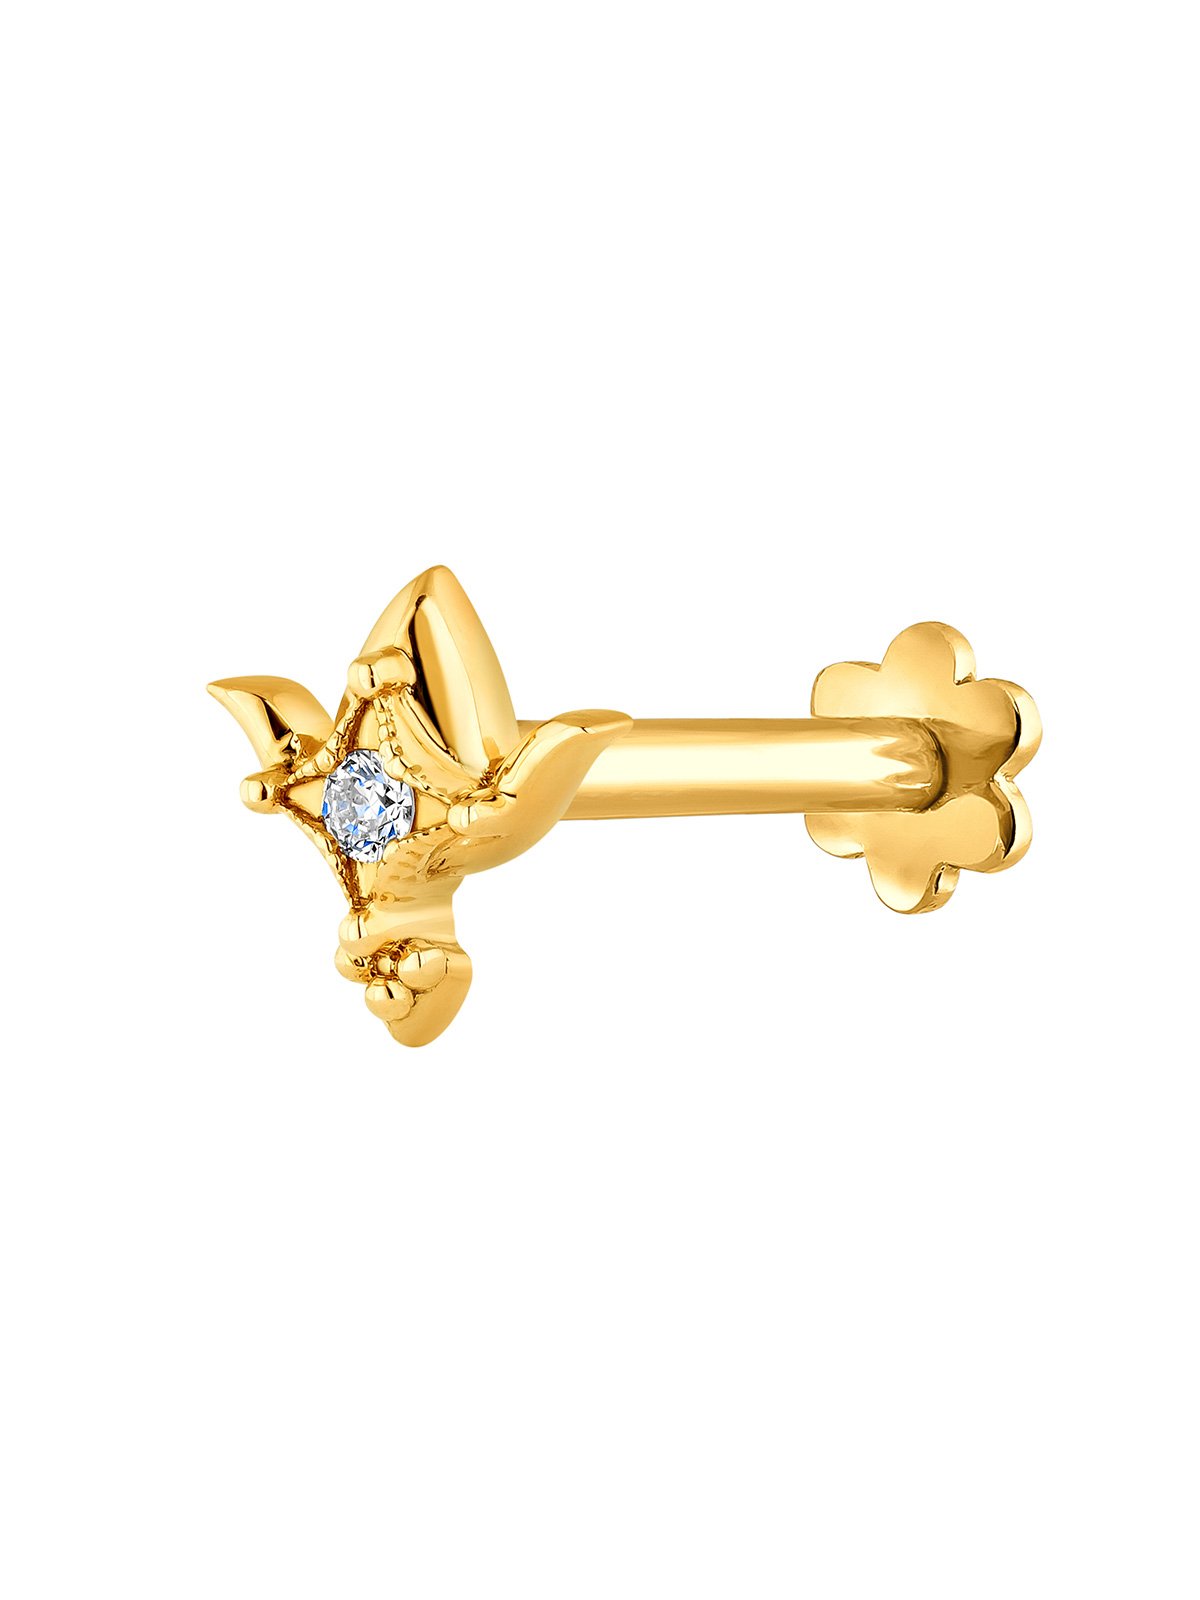 18K yellow gold piercing with diamond and lotus flower shape.